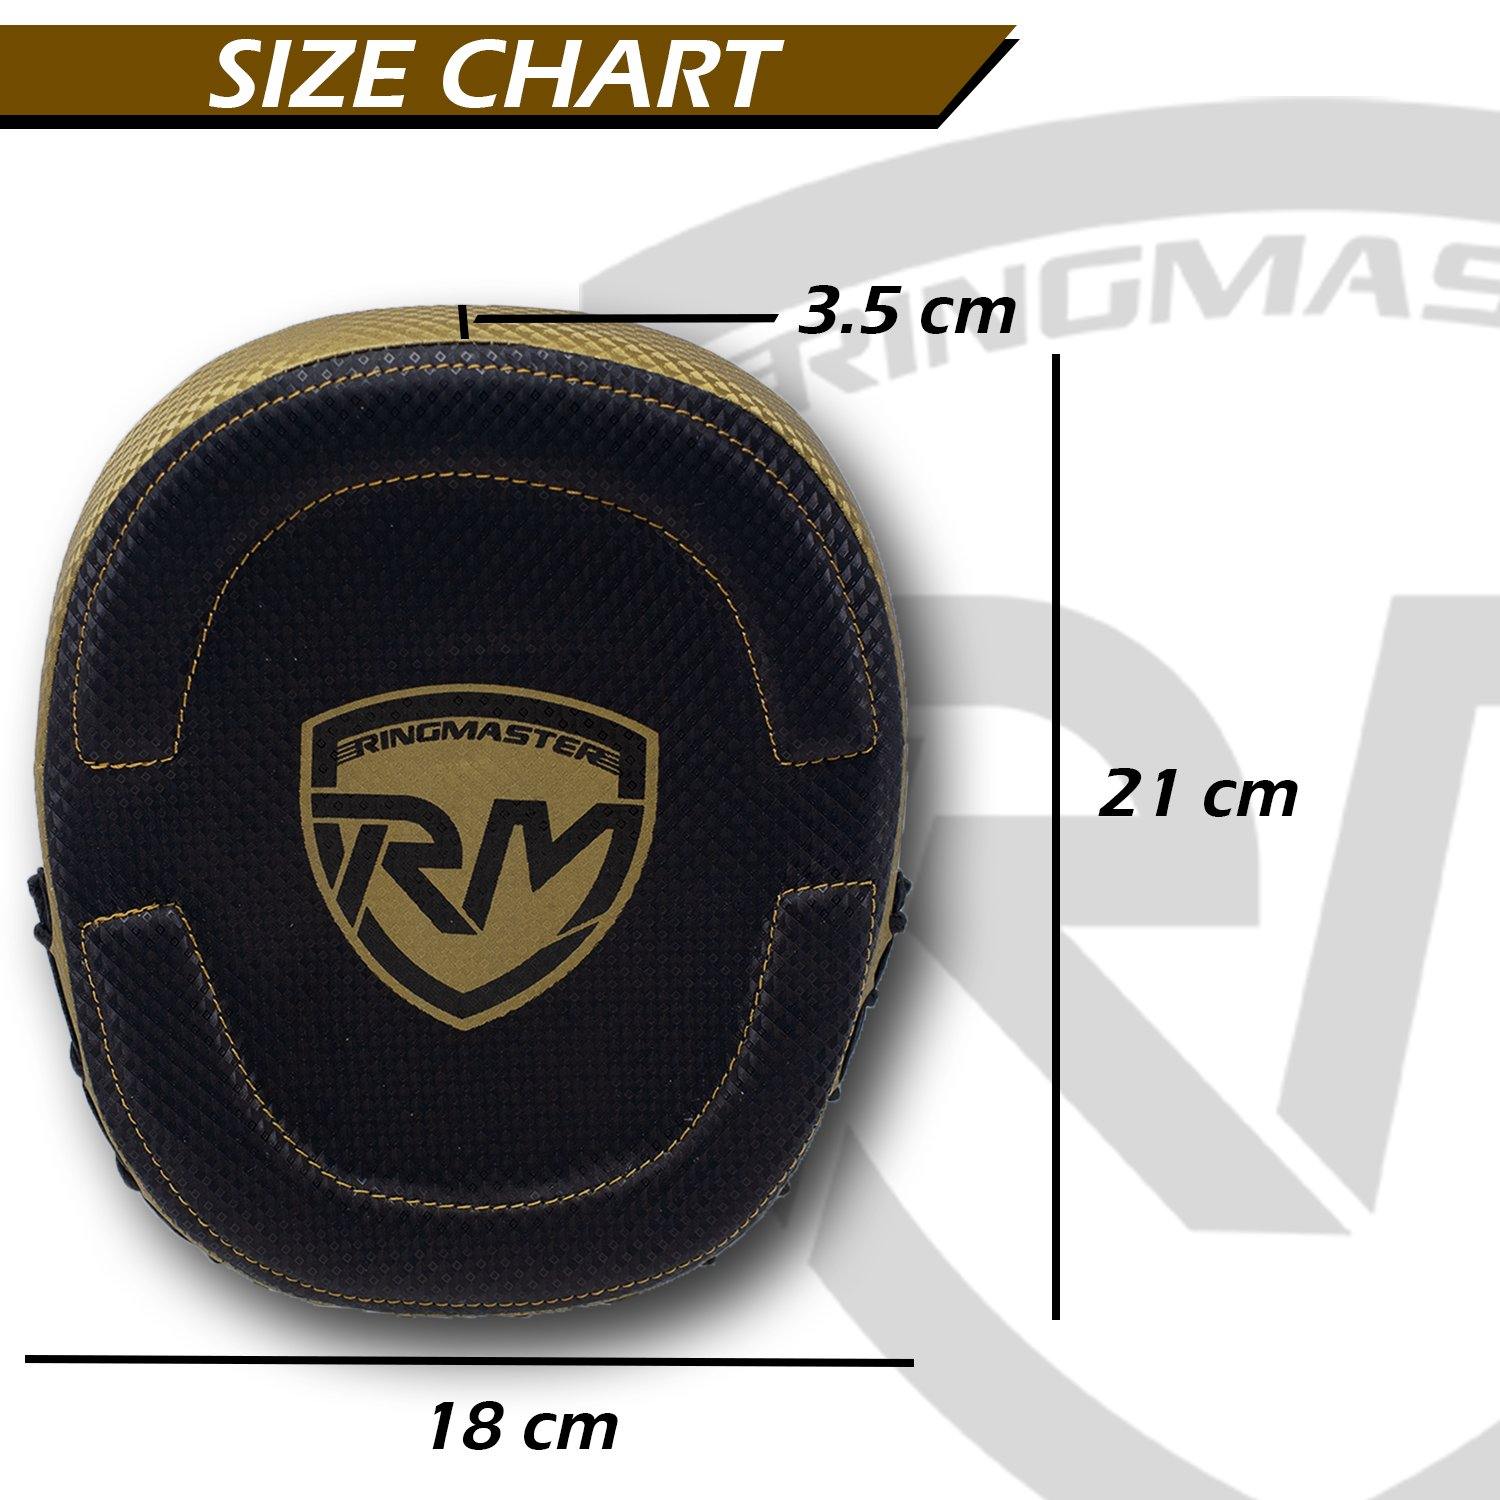 Hook and Jab Pads, boxing pads, punching pad, focus pads, kickboxing pads, focus pads boxing, boxing pad price, focus mitts, sparring pads, boxing gloves and pads, Ringmaster Sports Boxing Equipment, Ringmaster Sports Boxing pads, Cobra X2 Series Compact Focus Pads Black/Gold